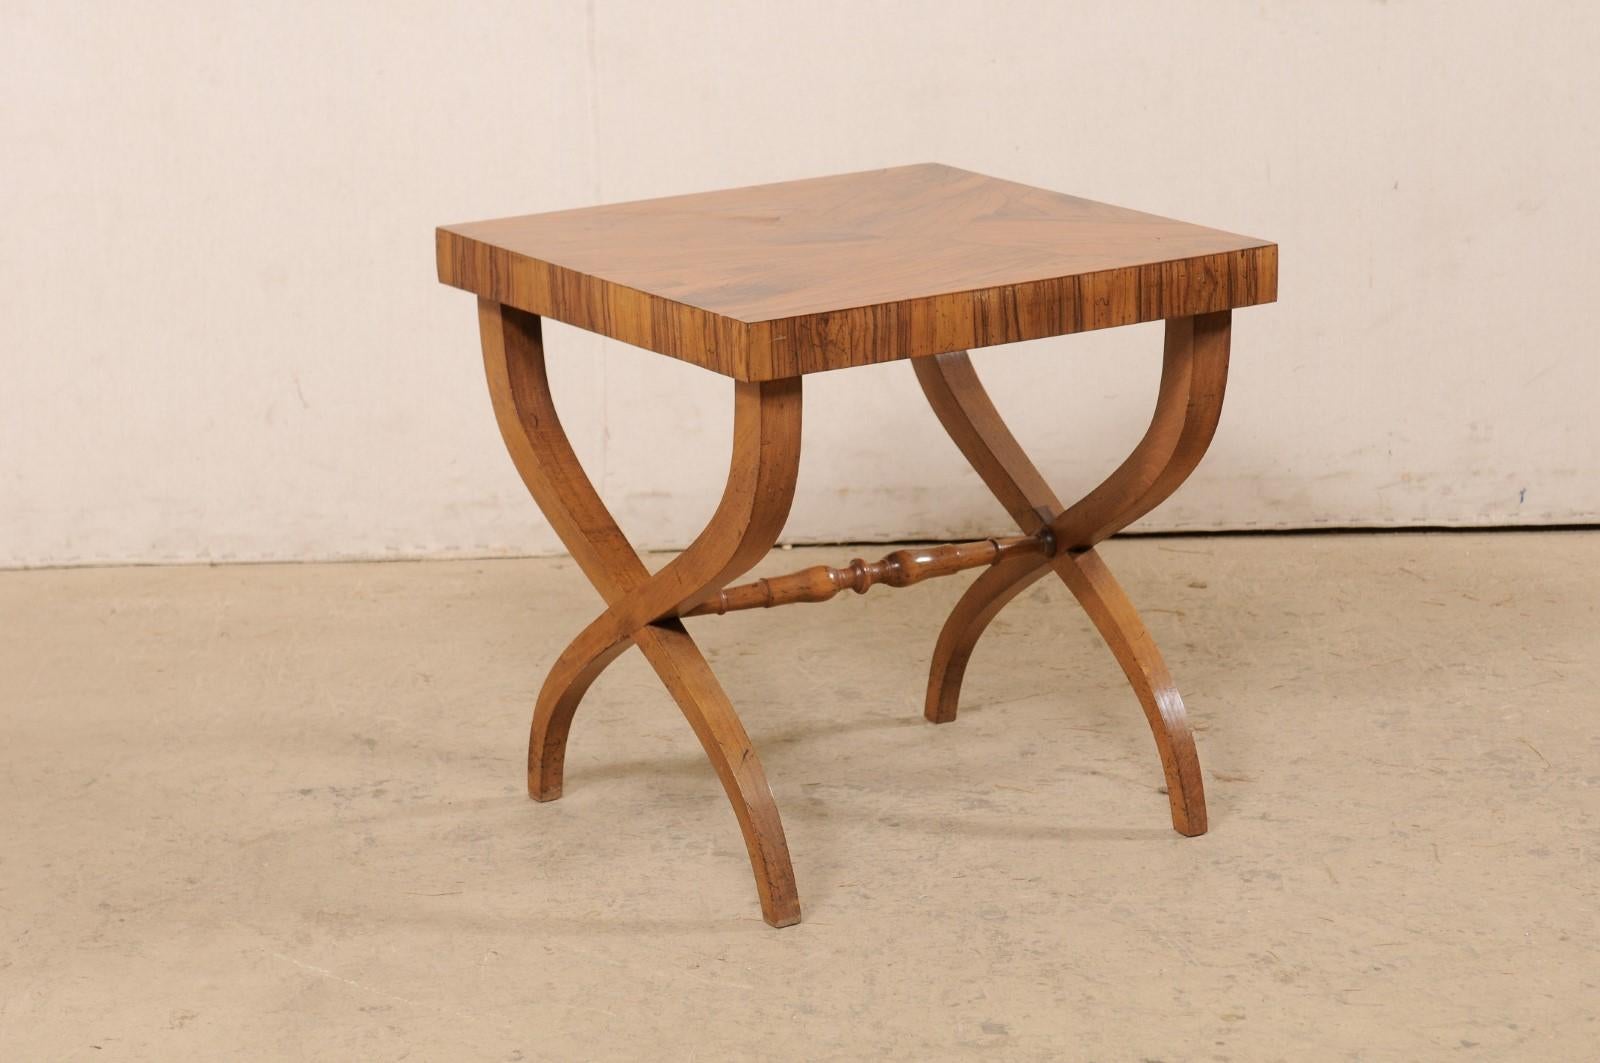 An Italian curule side table from the mid 20th century. This mid-century table from Italy has a square-shaped top of beautifully veneered olivewood, which is raised on a pair of curule (wavy x-shaped) wooden legs. The legs are braced at underside of